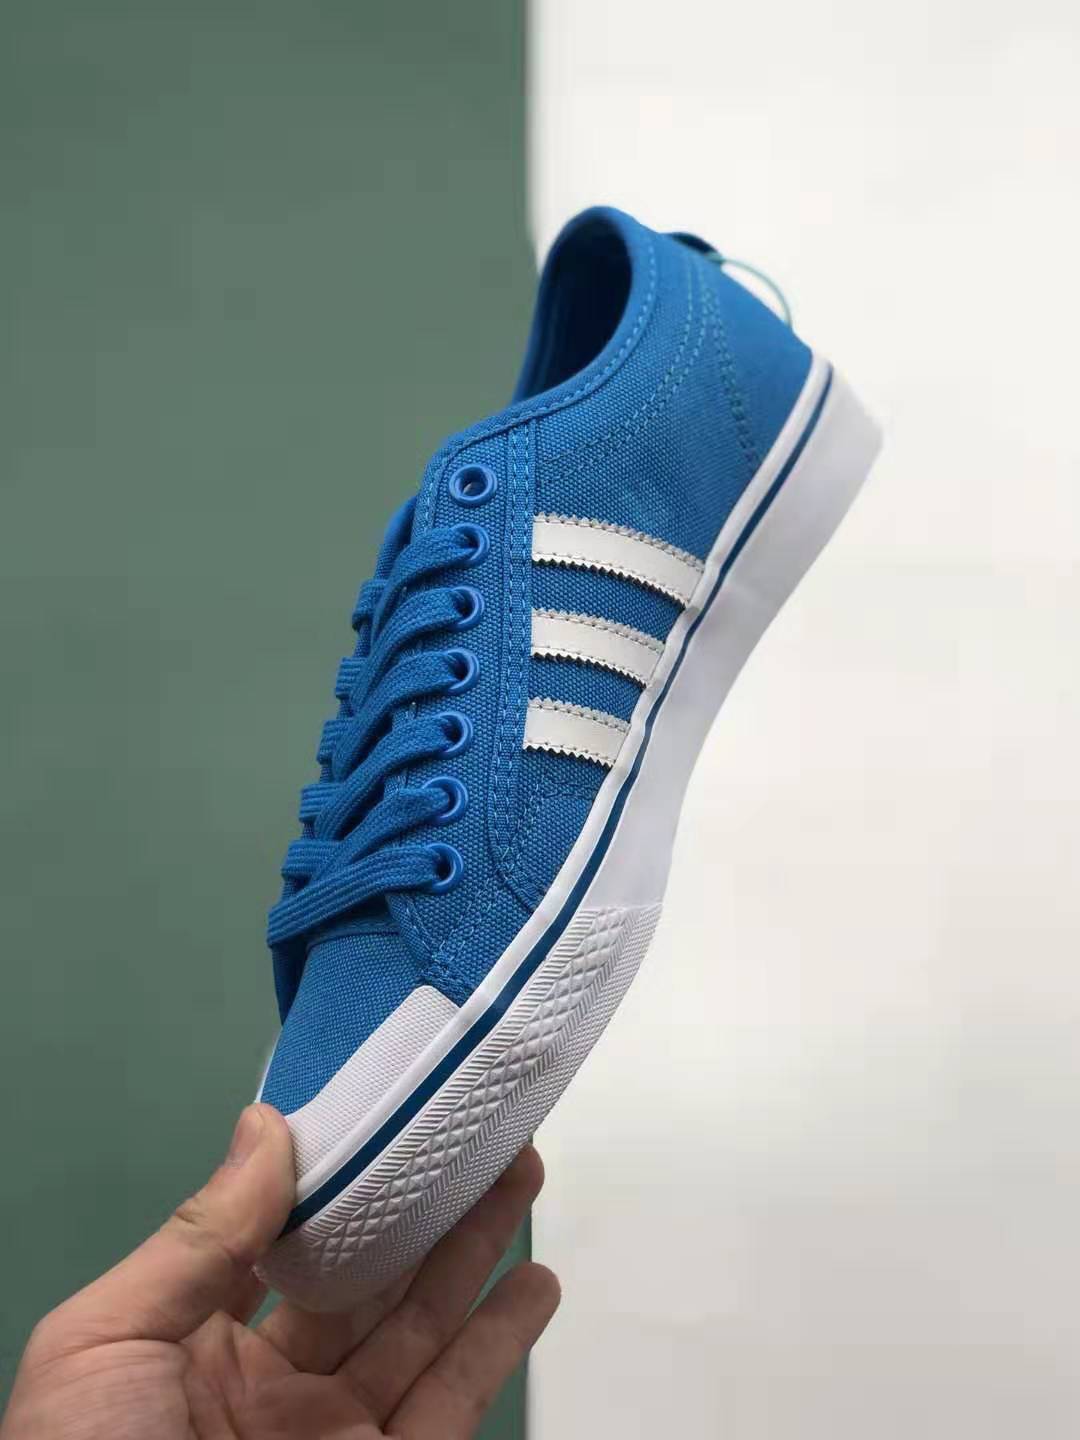 Adidas Nizza 'Footwear White' CQ2333 - Classic Style with a Clean Finish